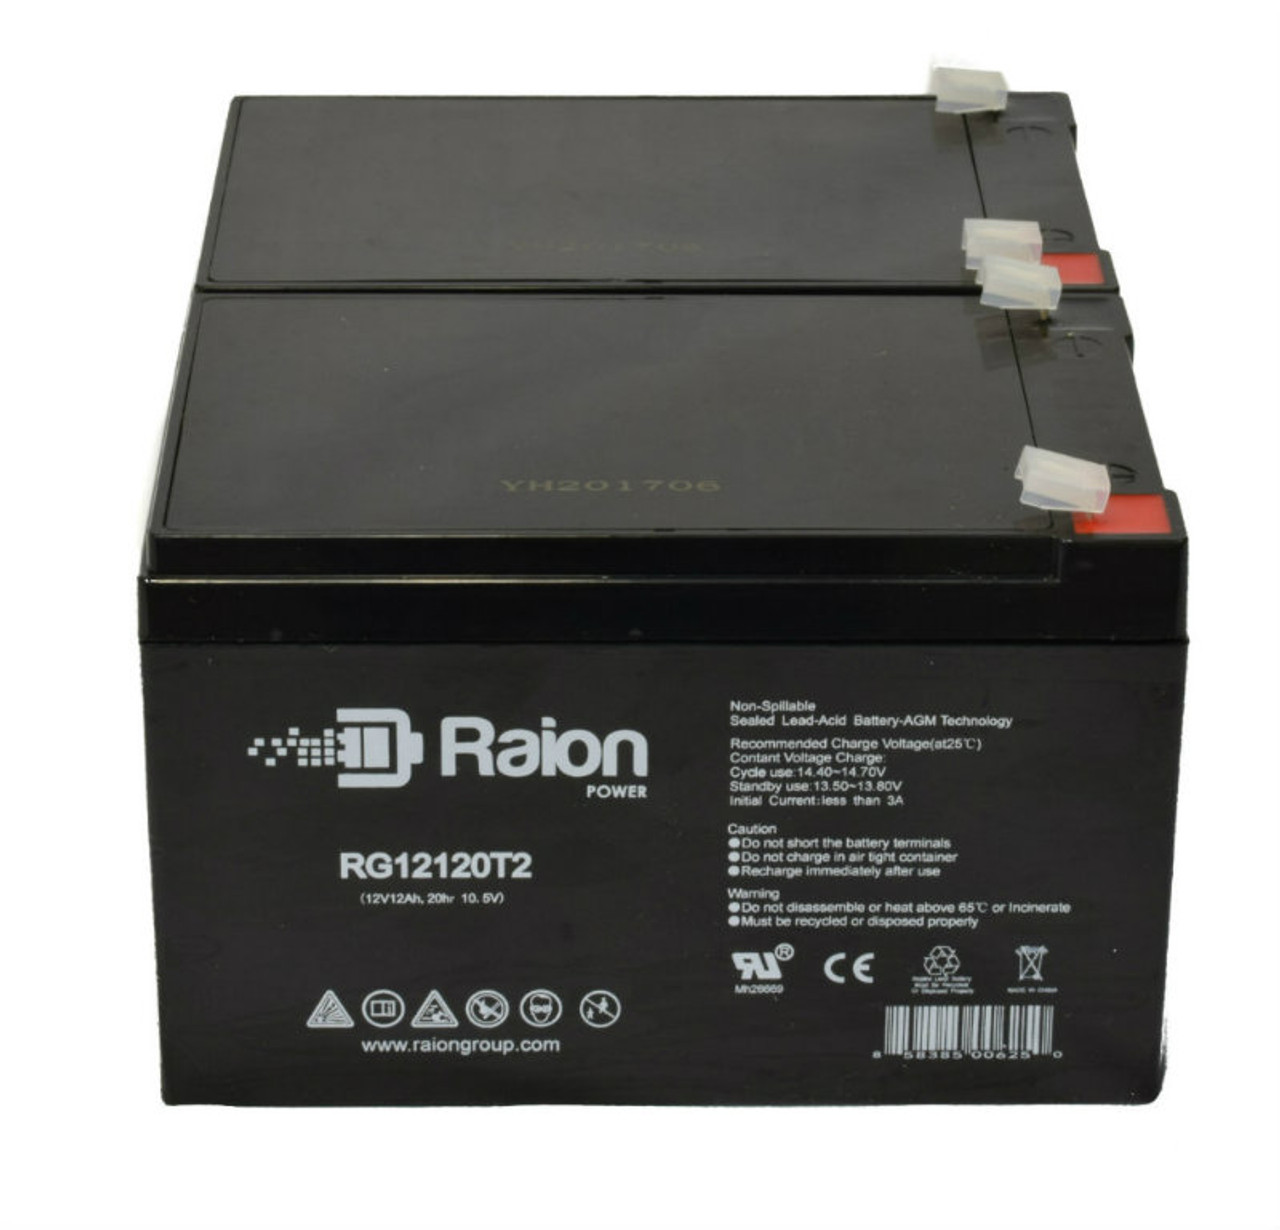 Raion Power 12V 12Ah Non-Spillable Compatible Replacement Battery for Jupiter Batteries JB12-012 - (2 Pack)